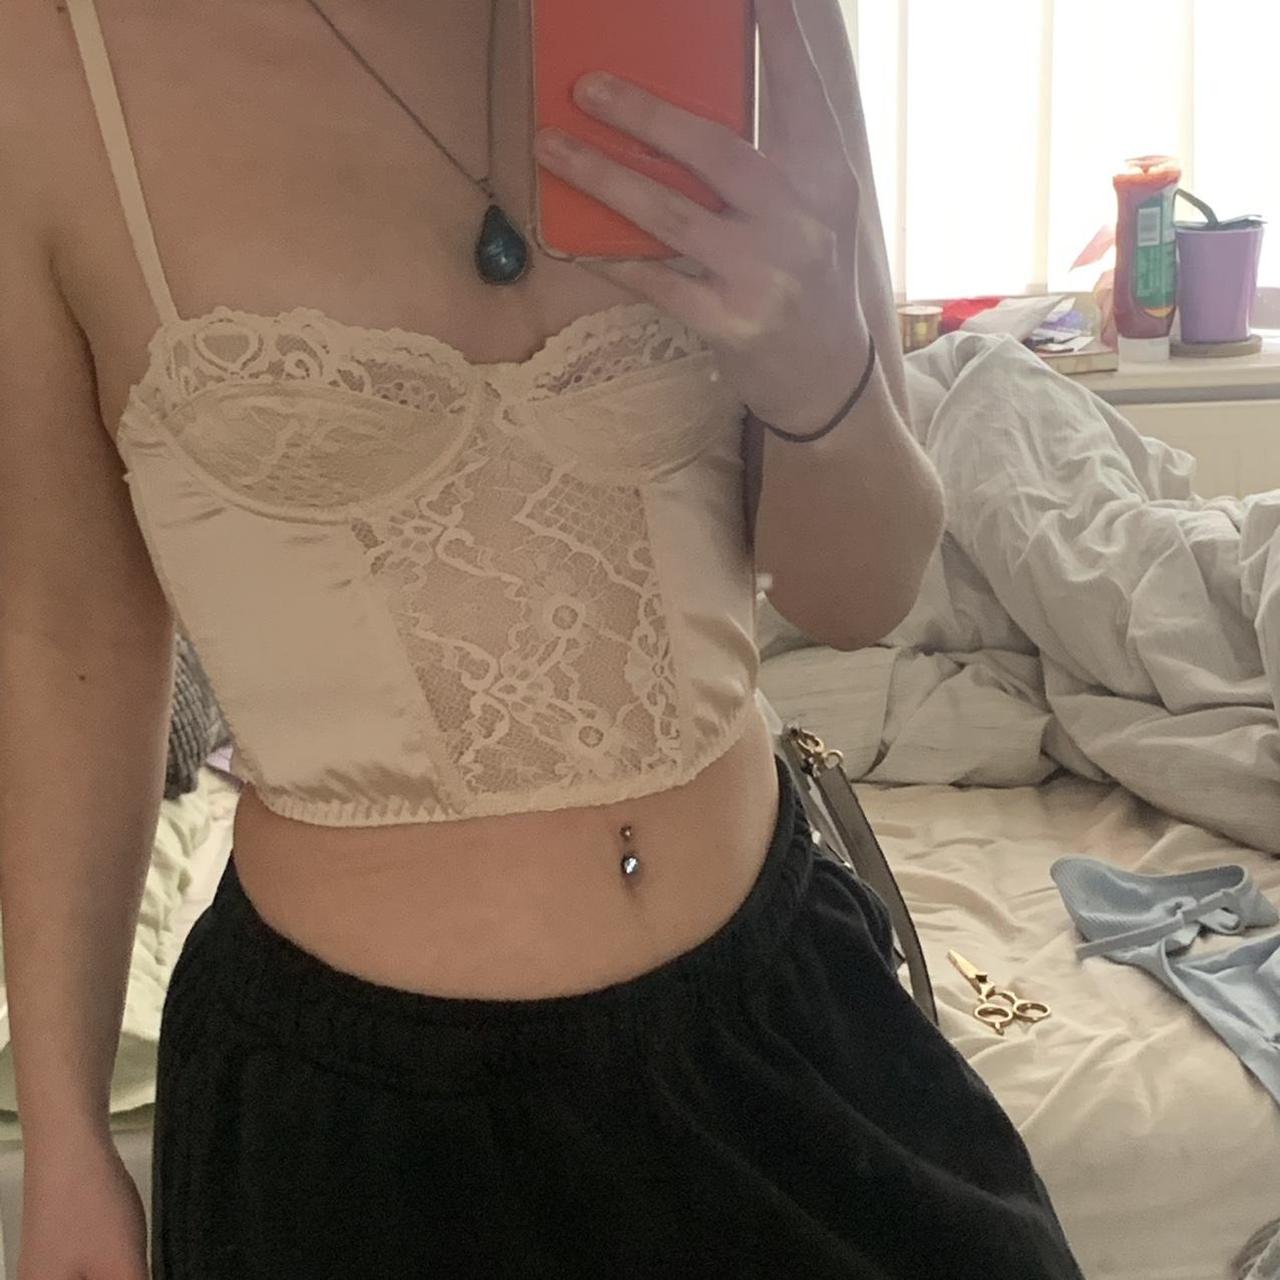 UO Ava Lace & Satin Corset Top Urban Outfitters - Depop